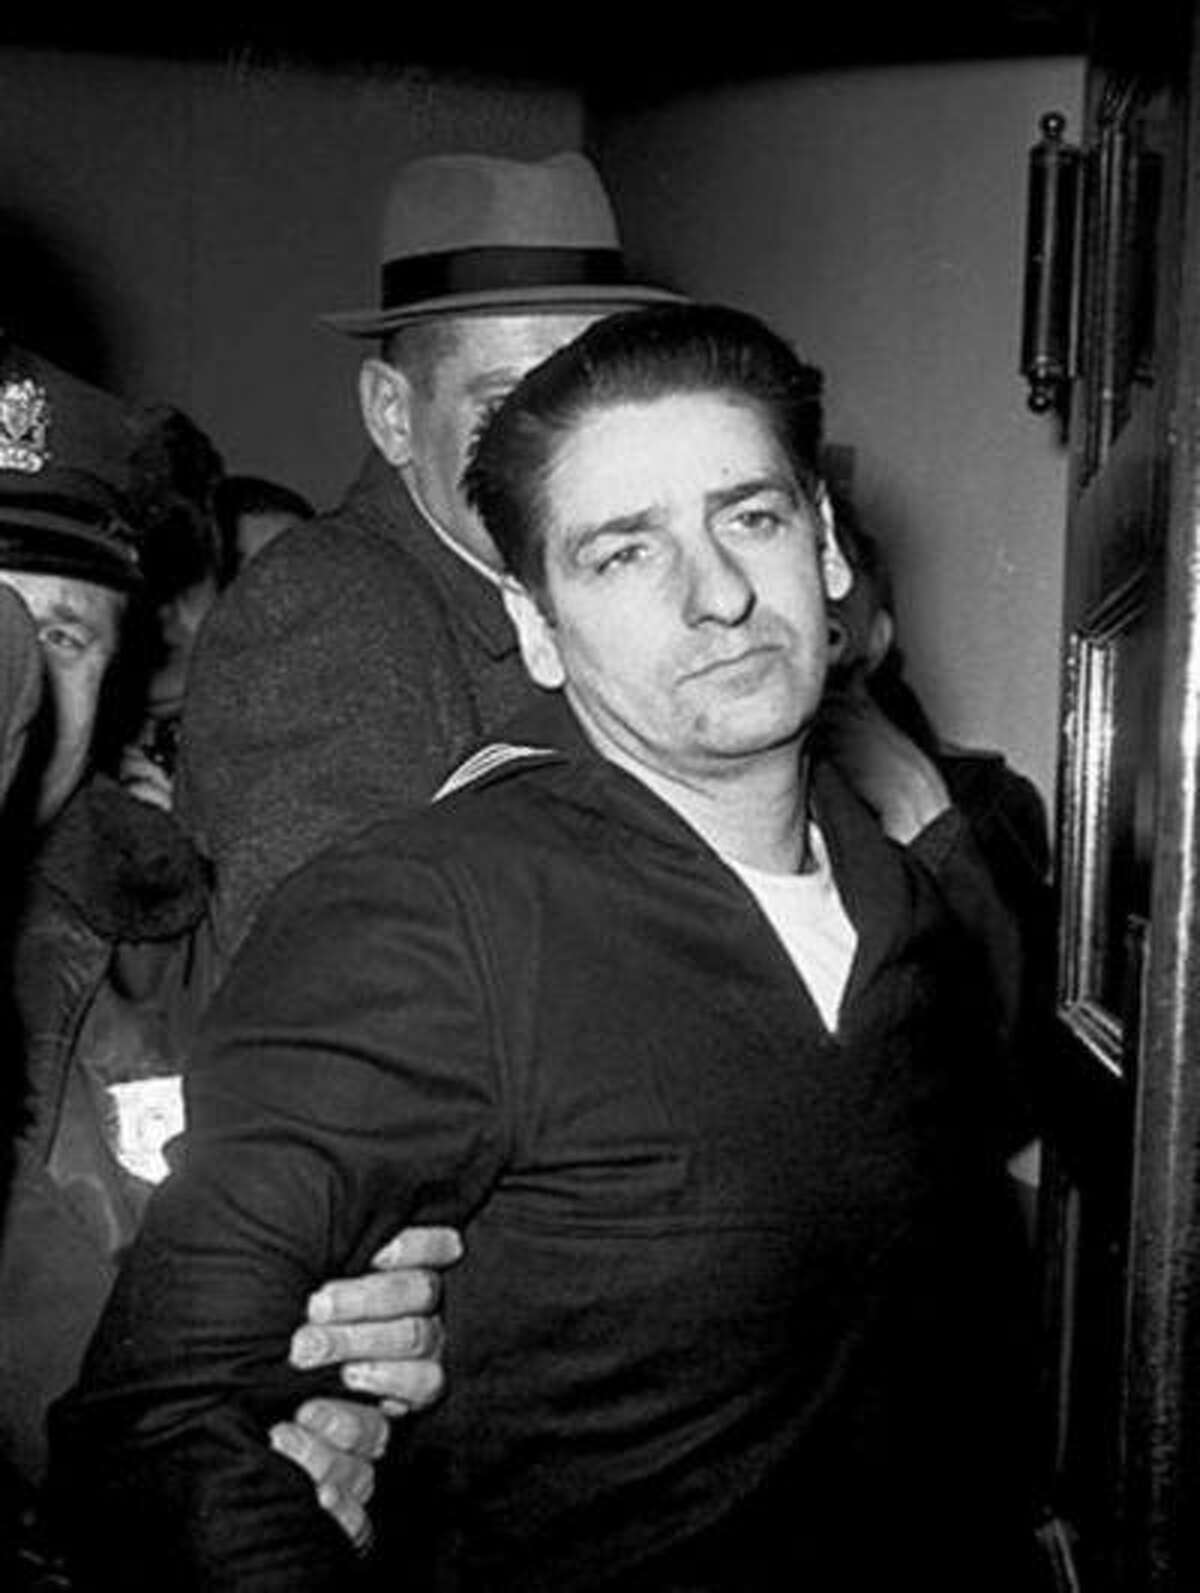 FILE - This Feb. 25, 1967, file photo shows self-confessed Boston Strangler Albert DeSalvo minutes after his capture in Boston. DeSalvo confessed to the string of 1960s killings but was never convicted. He died in prison in the 1970s. Massachusetts officials said Thursday, July 11, 2013, that DNA technology led to a breakthrough, putting them in a position to formally charge the Boston Strangler with the murder of Mary Sullivan, last of the slayings attributed to the Boston Strangler. (AP Photo, File)